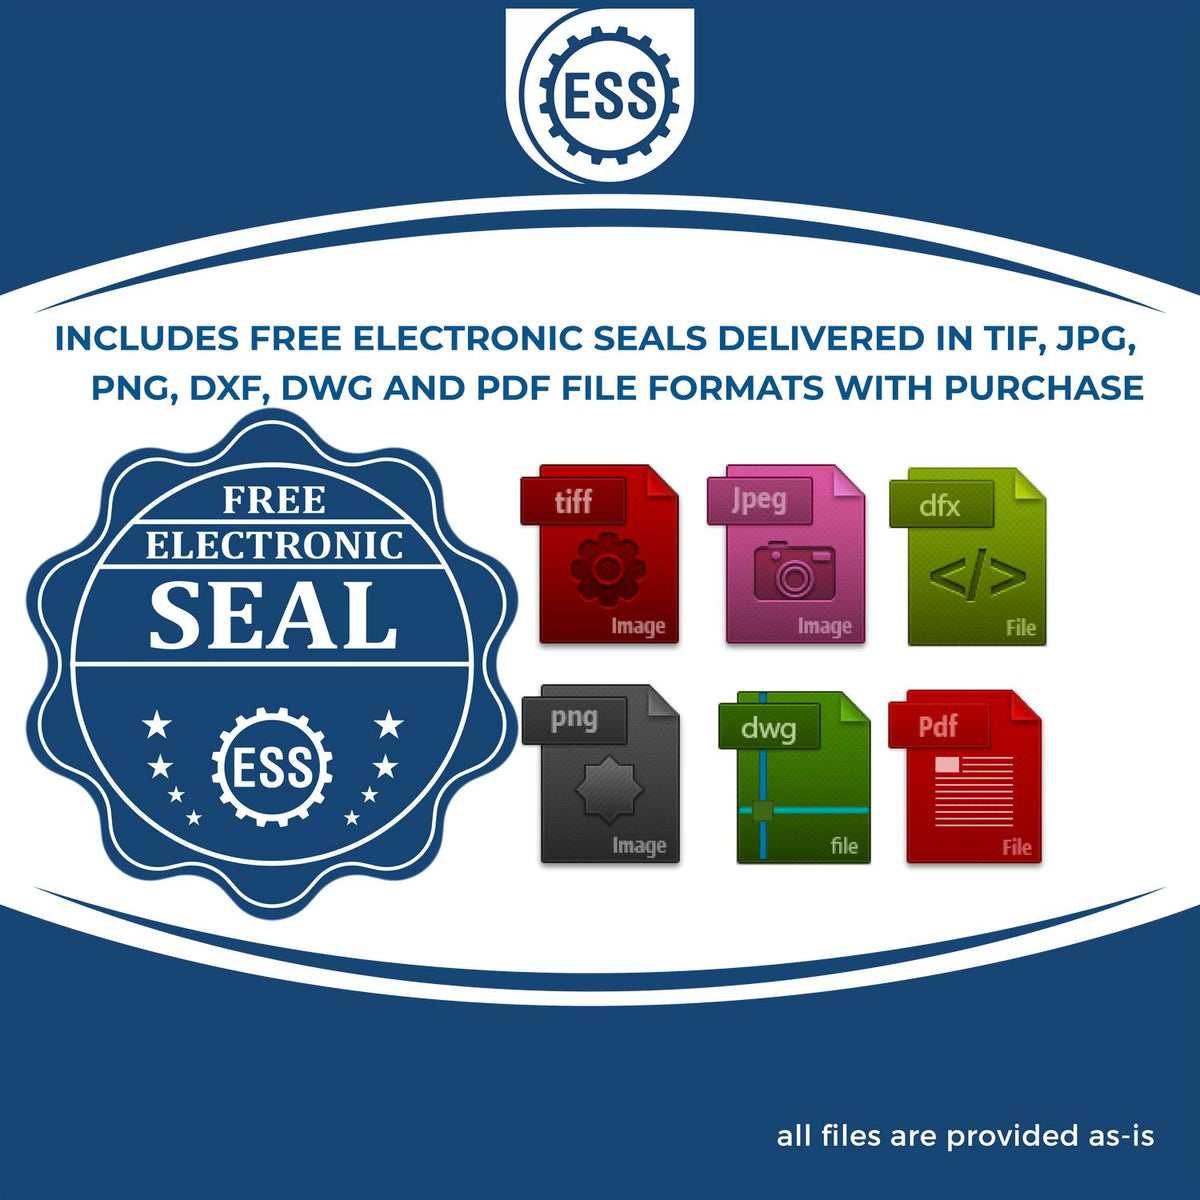 An infographic for the free electronic seal for the Self-Inking Rectangular Florida Notary Stamp illustrating the different file type icons such as DXF, DWG, TIF, JPG and PNG.